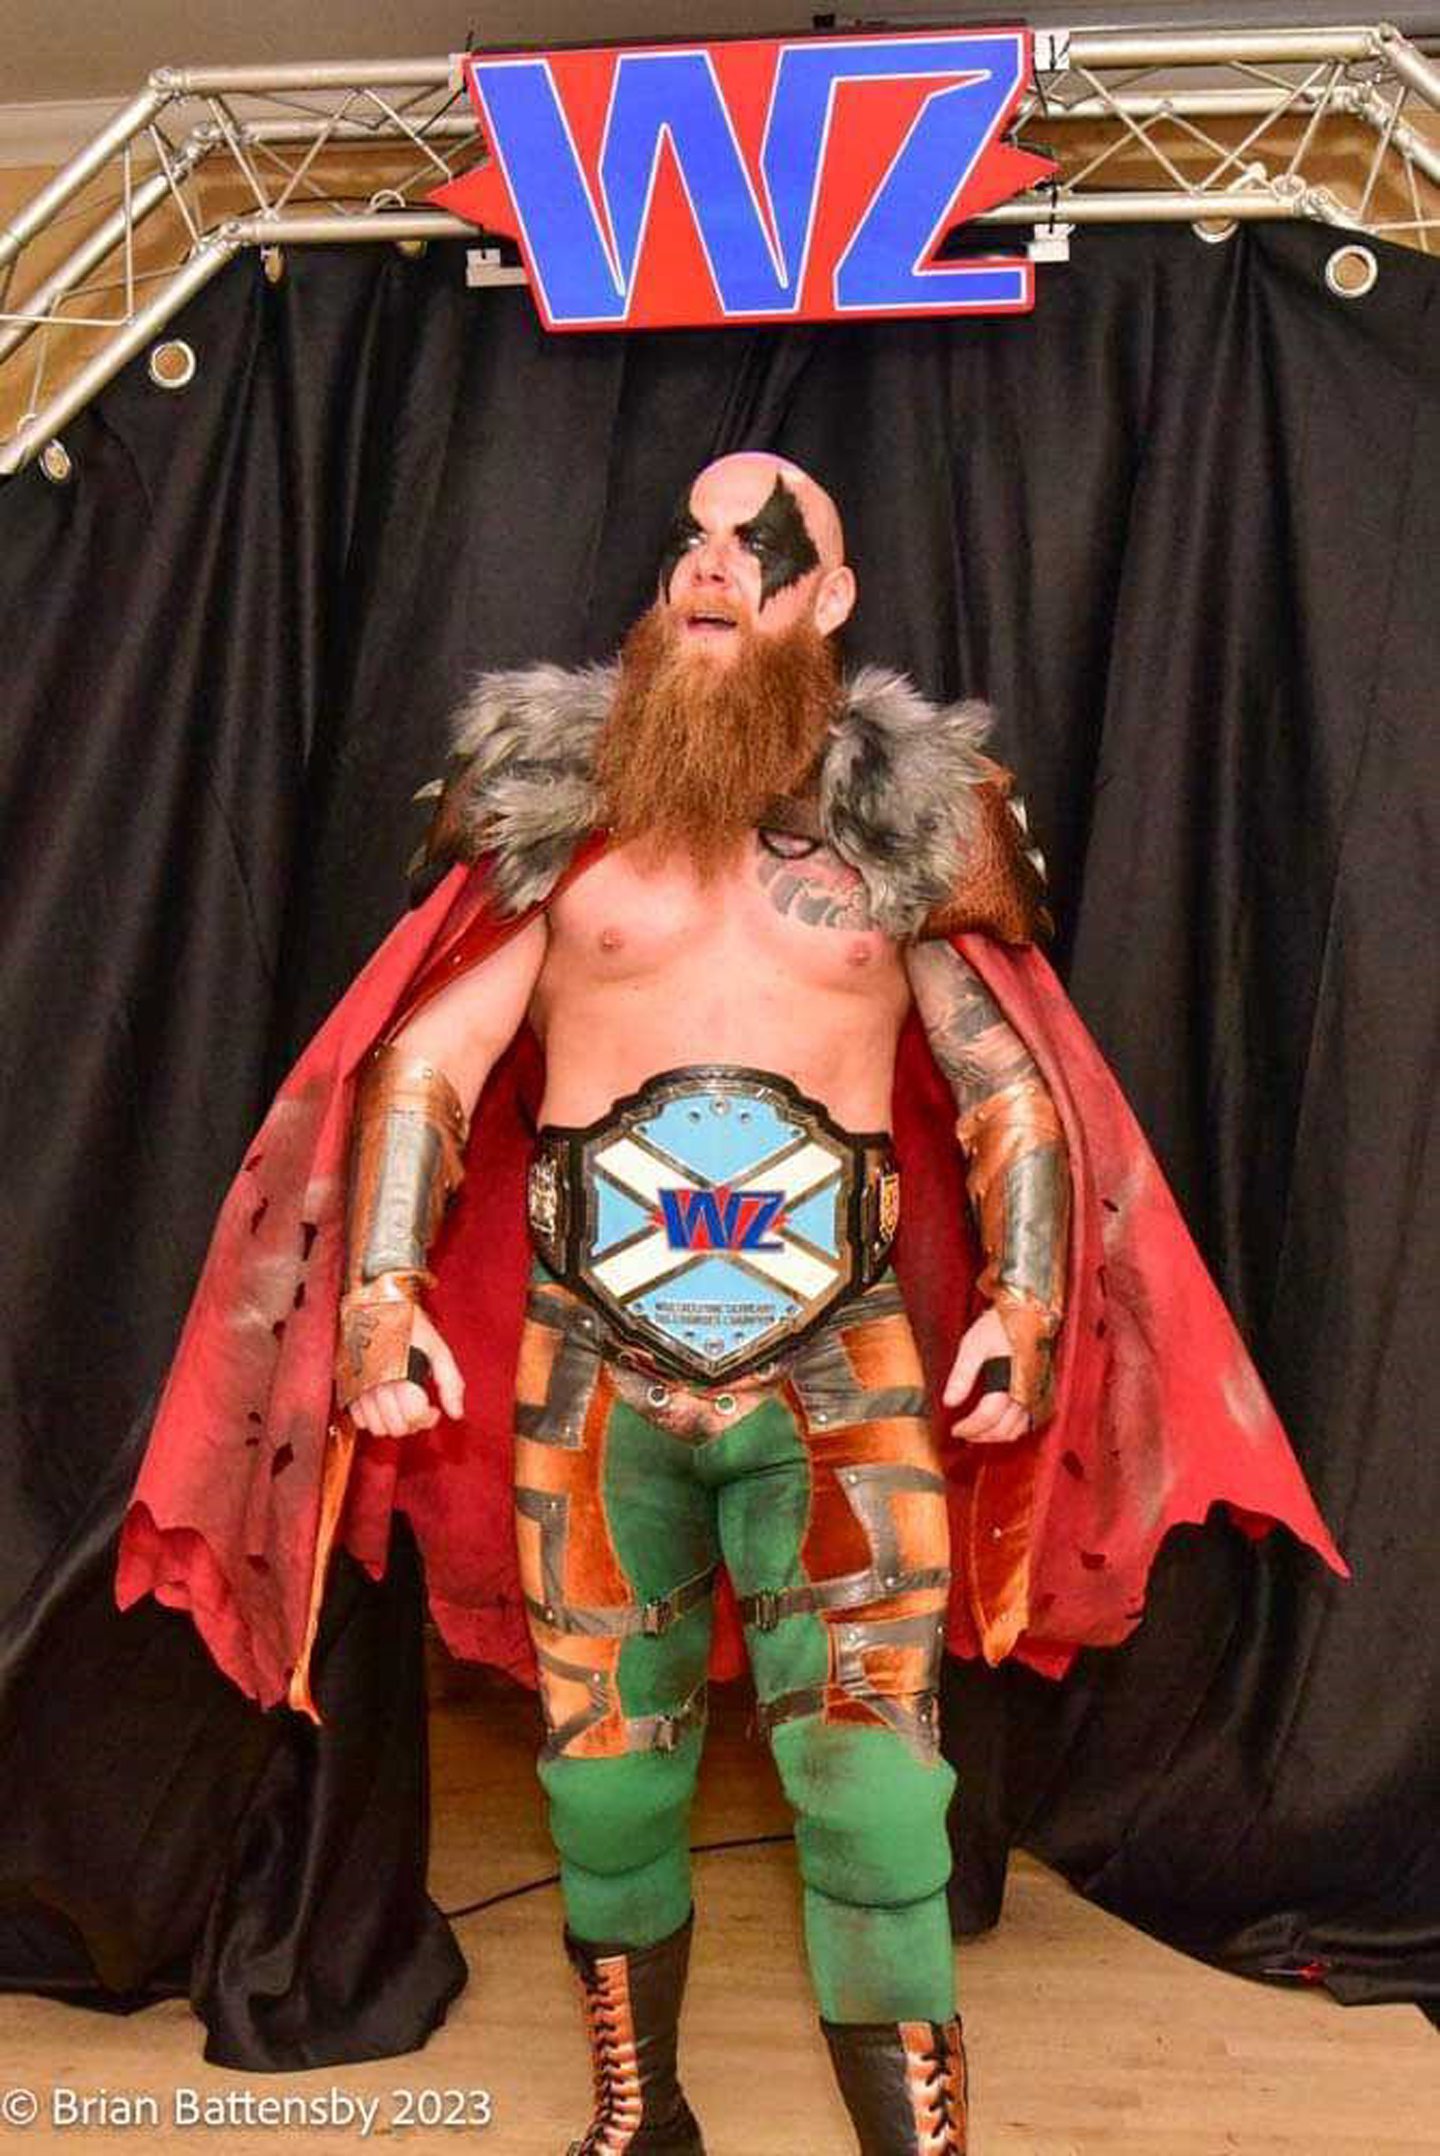 Wrestler 'The Mighty' Caleb Valhalla enters the arena ready for action. Image: Brian Battensby